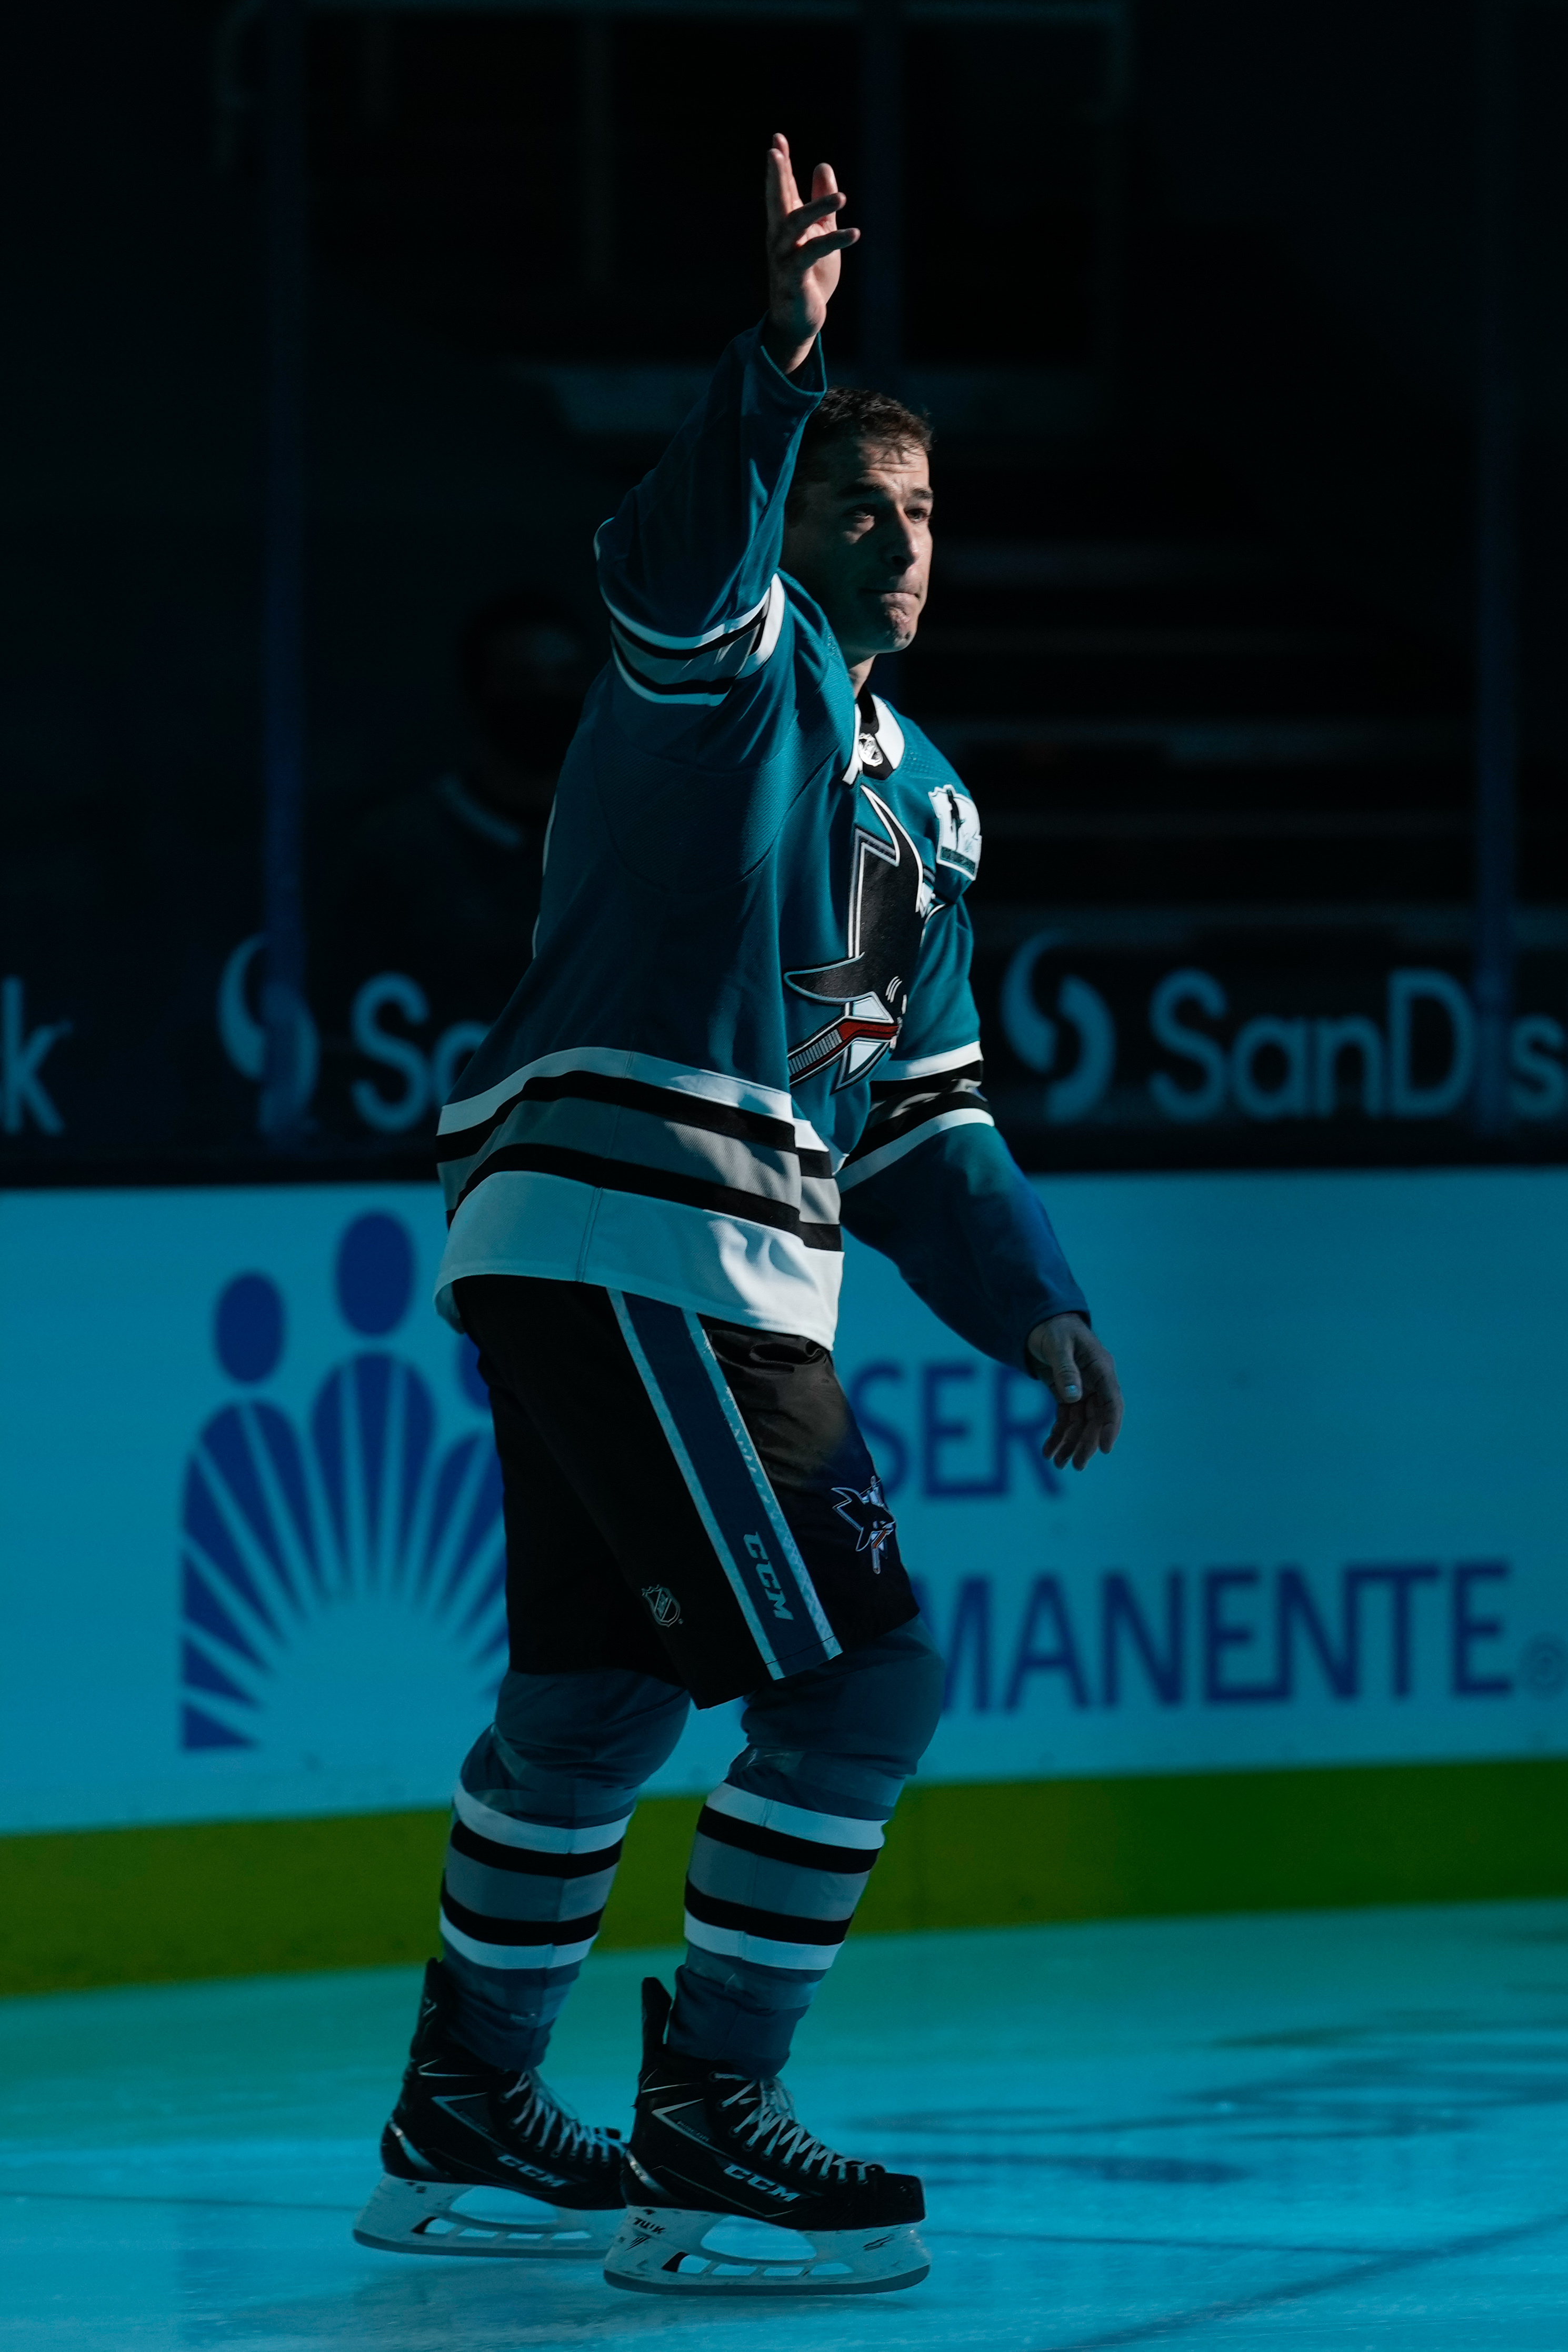 Updated times for Patrick Marleau jersey retirement game - Feb 25th :  r/hockey